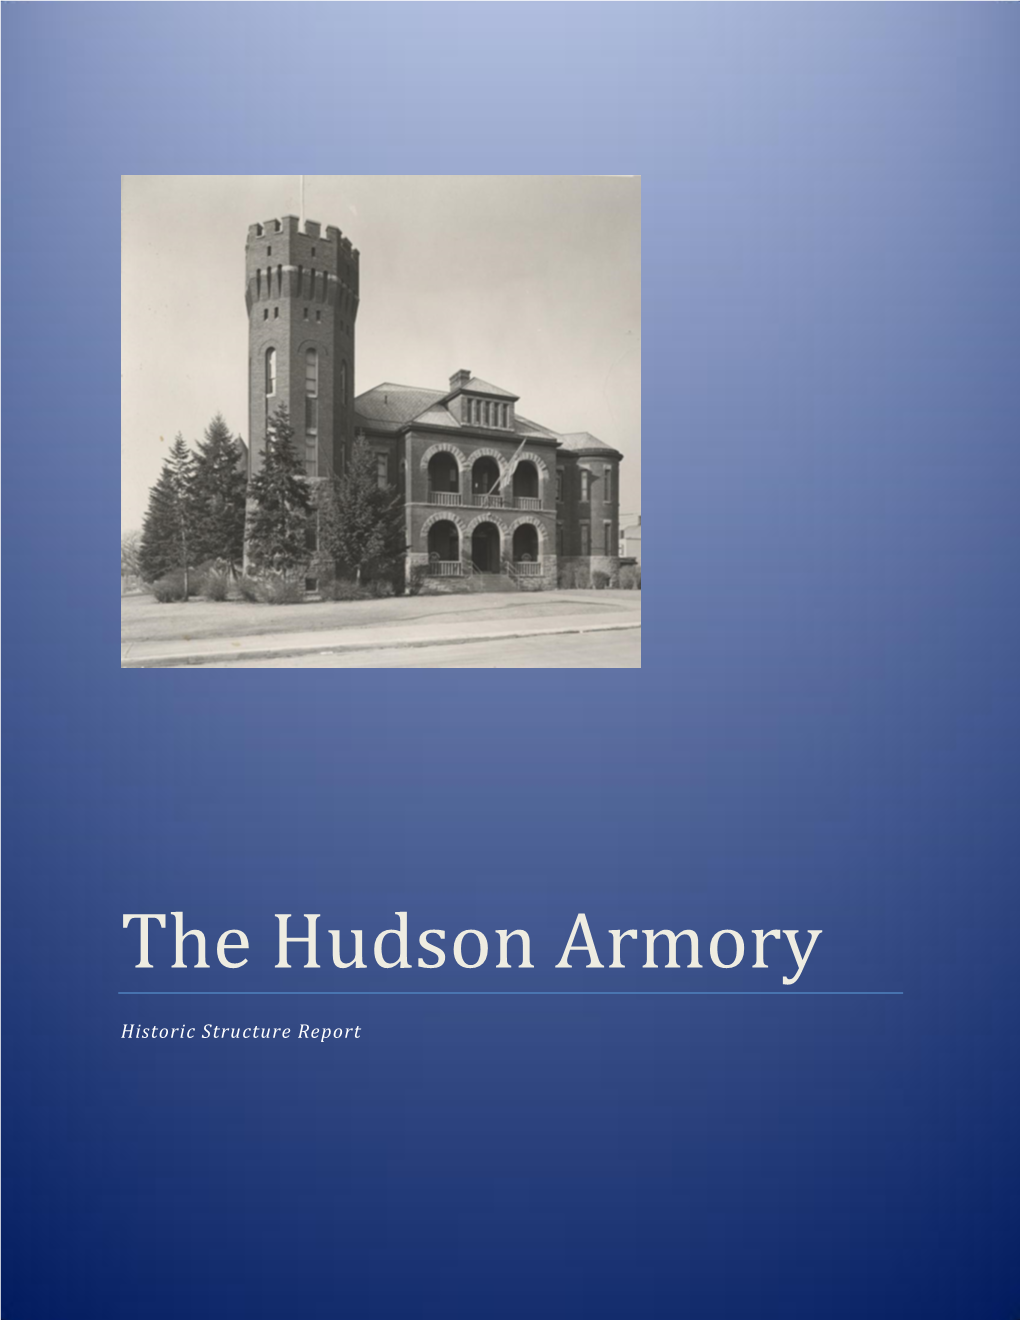 The Hudson Armory